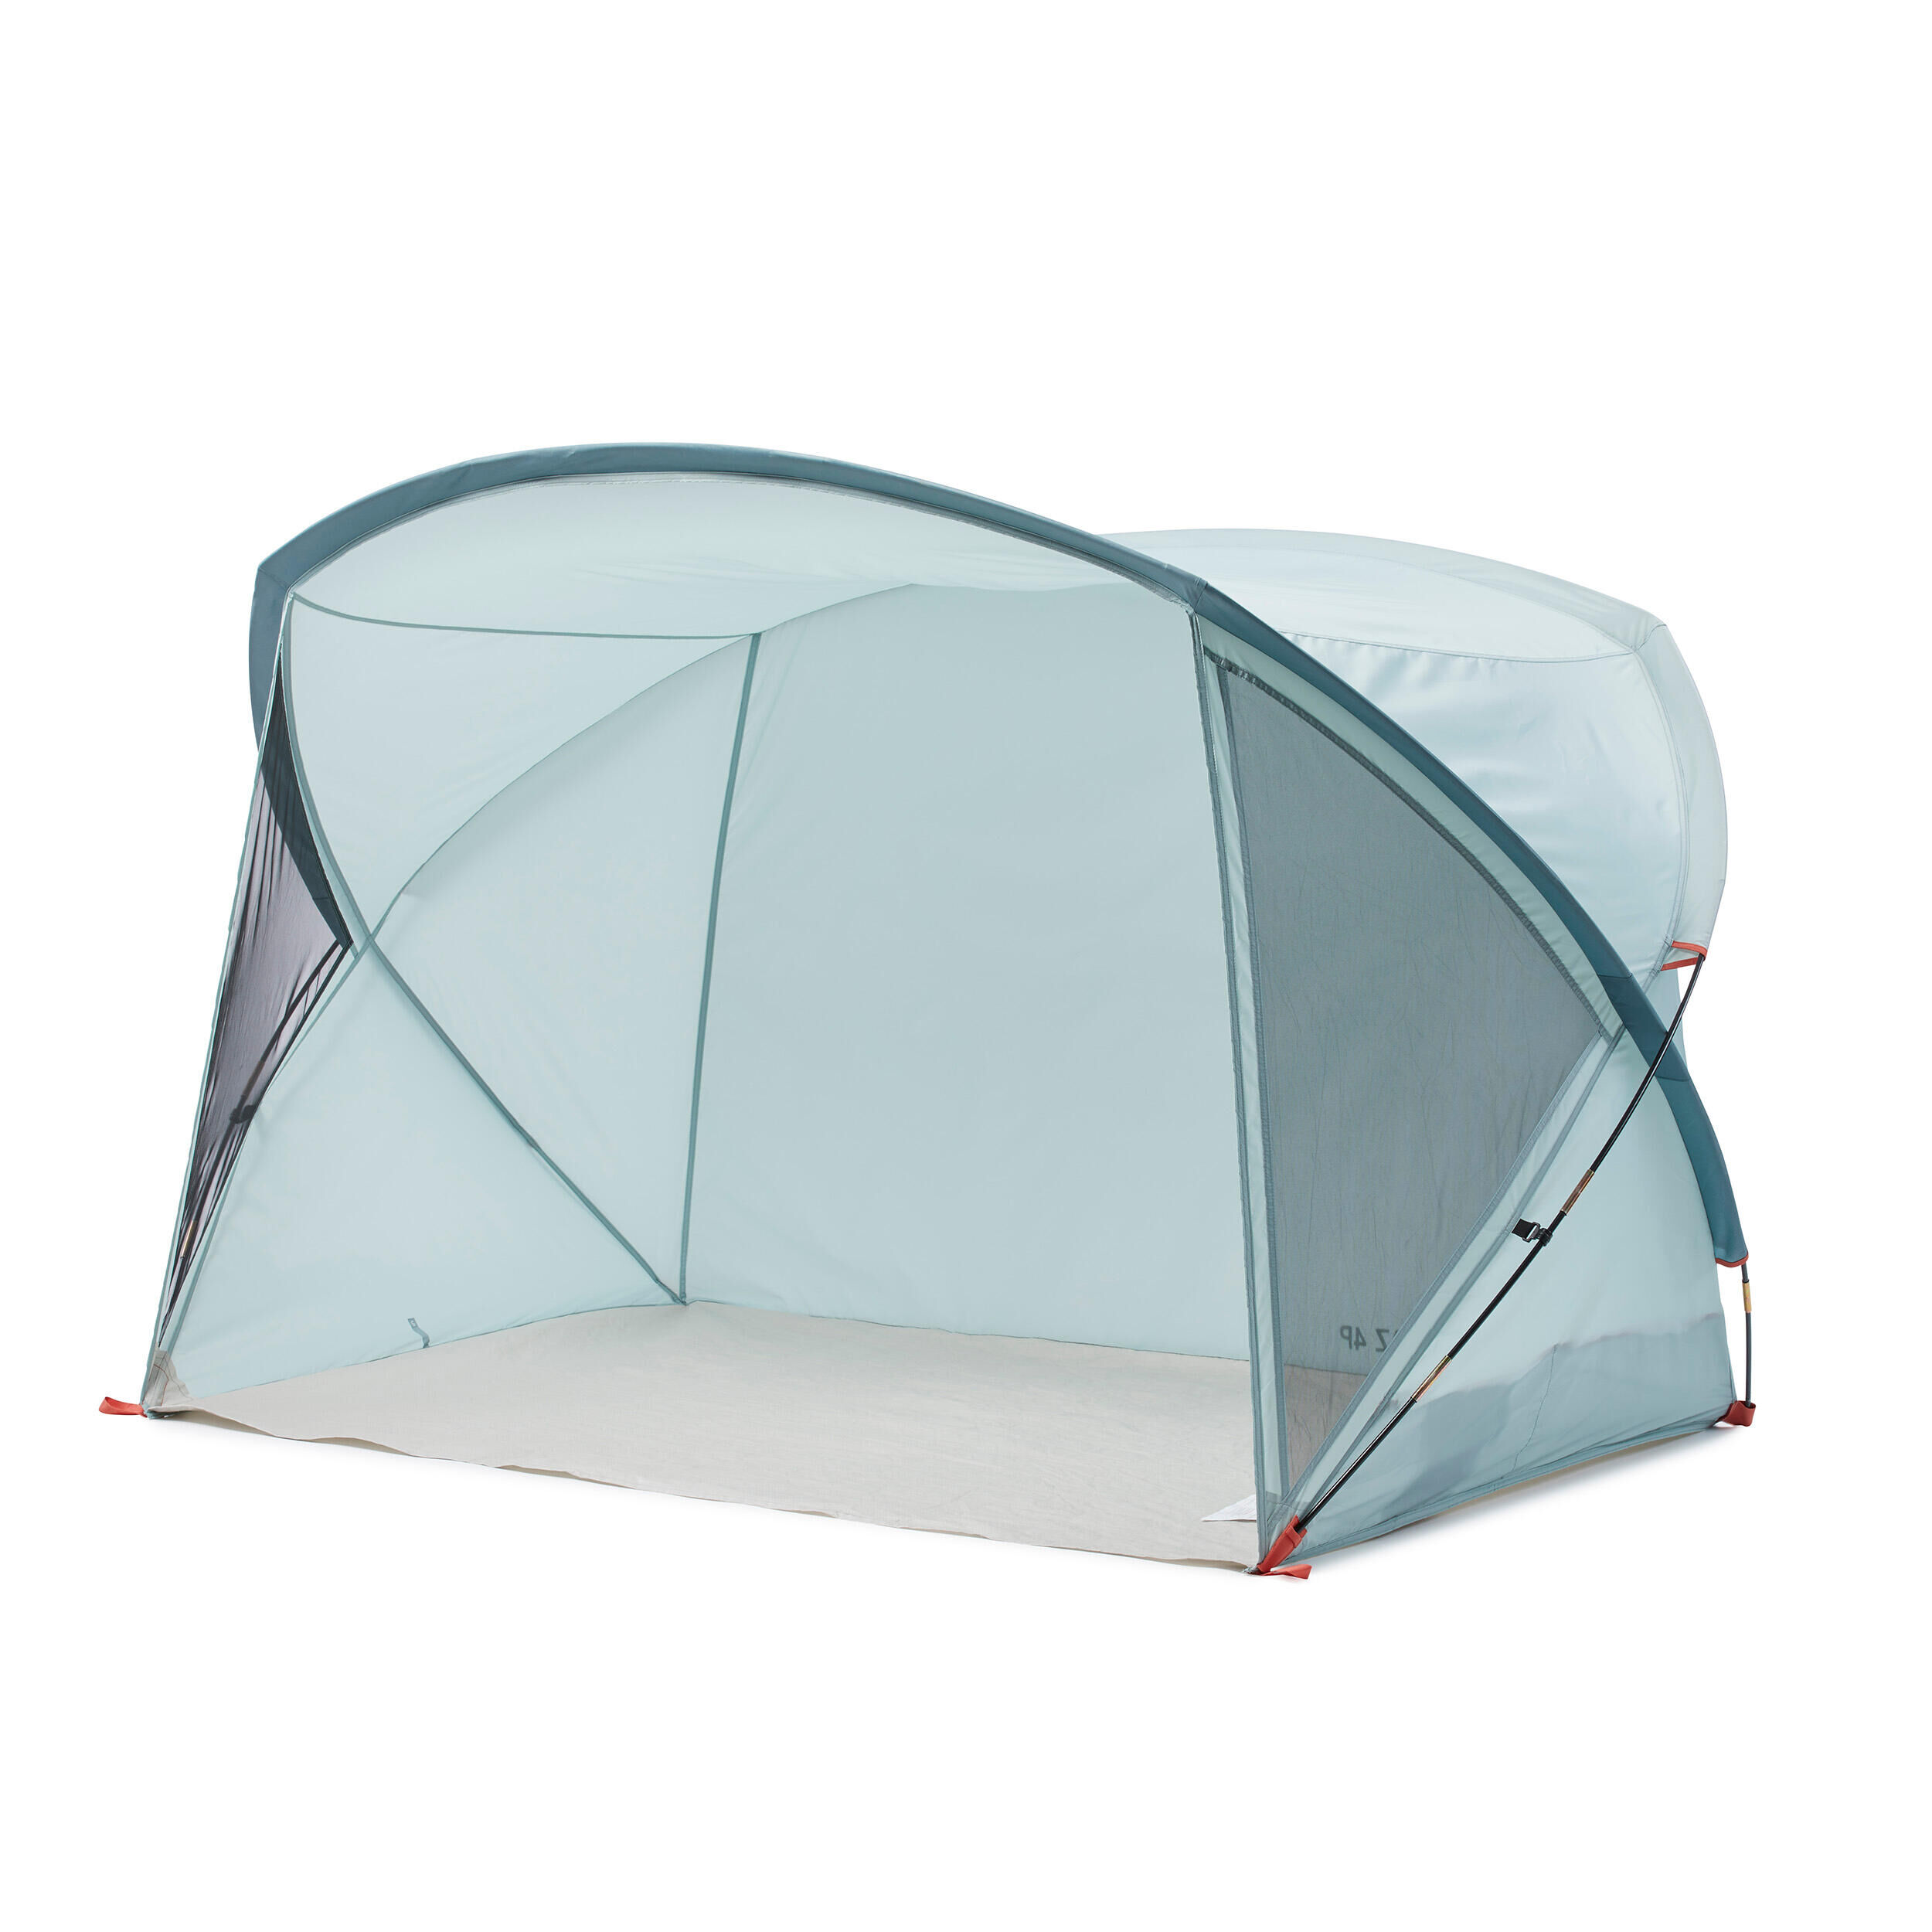 QUECHUA Camping Shelter with Poles - 4 person - Arpenaz 4P